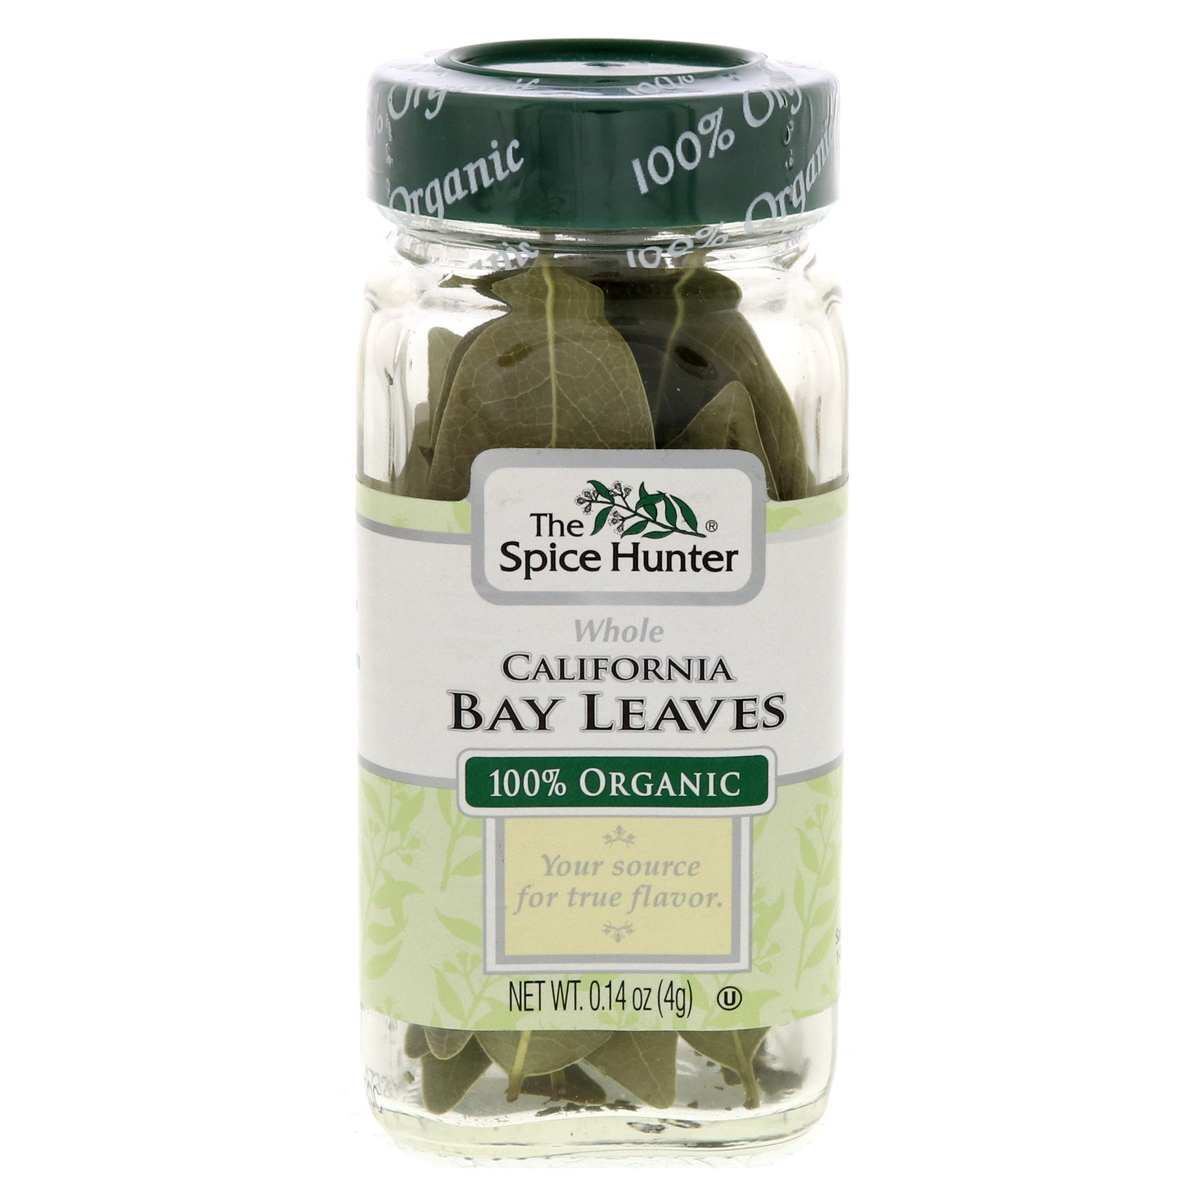 The Spice Hunter California Whole Bay Leaves 4g